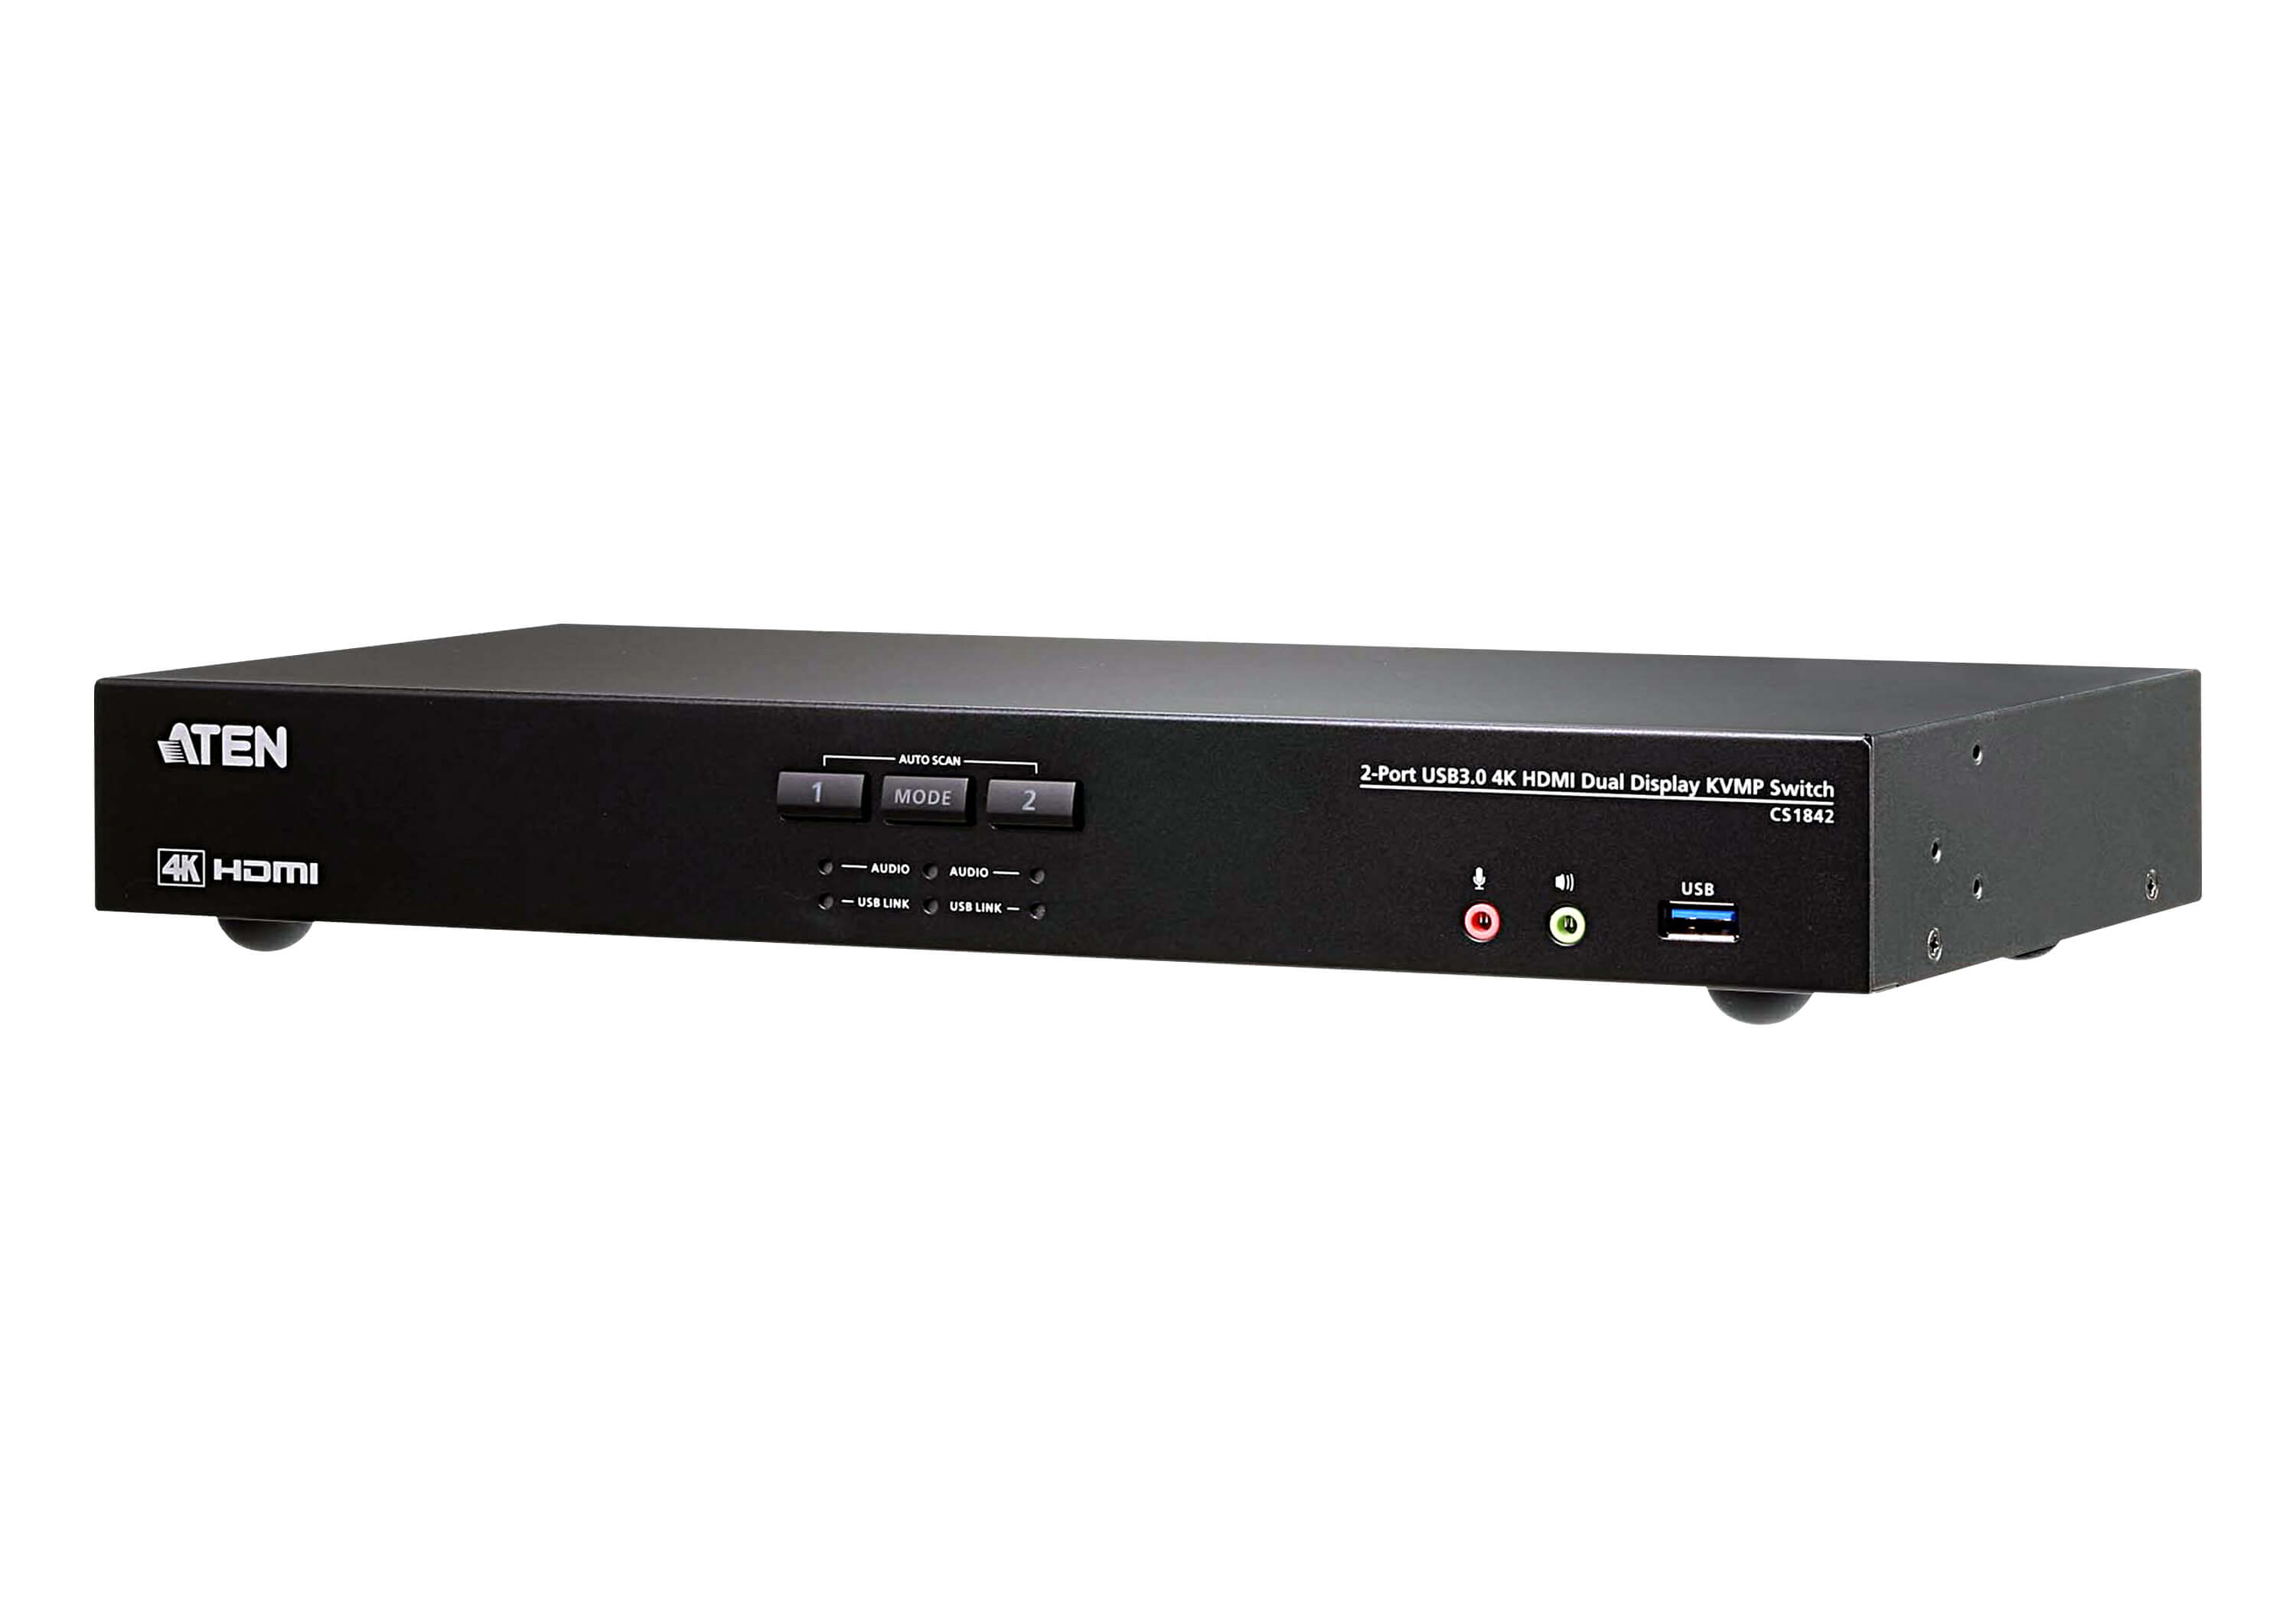 KVM Switches/Aten: Aten, Desktop, KVMP, Switch, 2, Port, Dual, Display, 4k, HDMI, w/, audio, Cables, Included, 2x, USB, Port, Selection, Via, Front, Panel, 